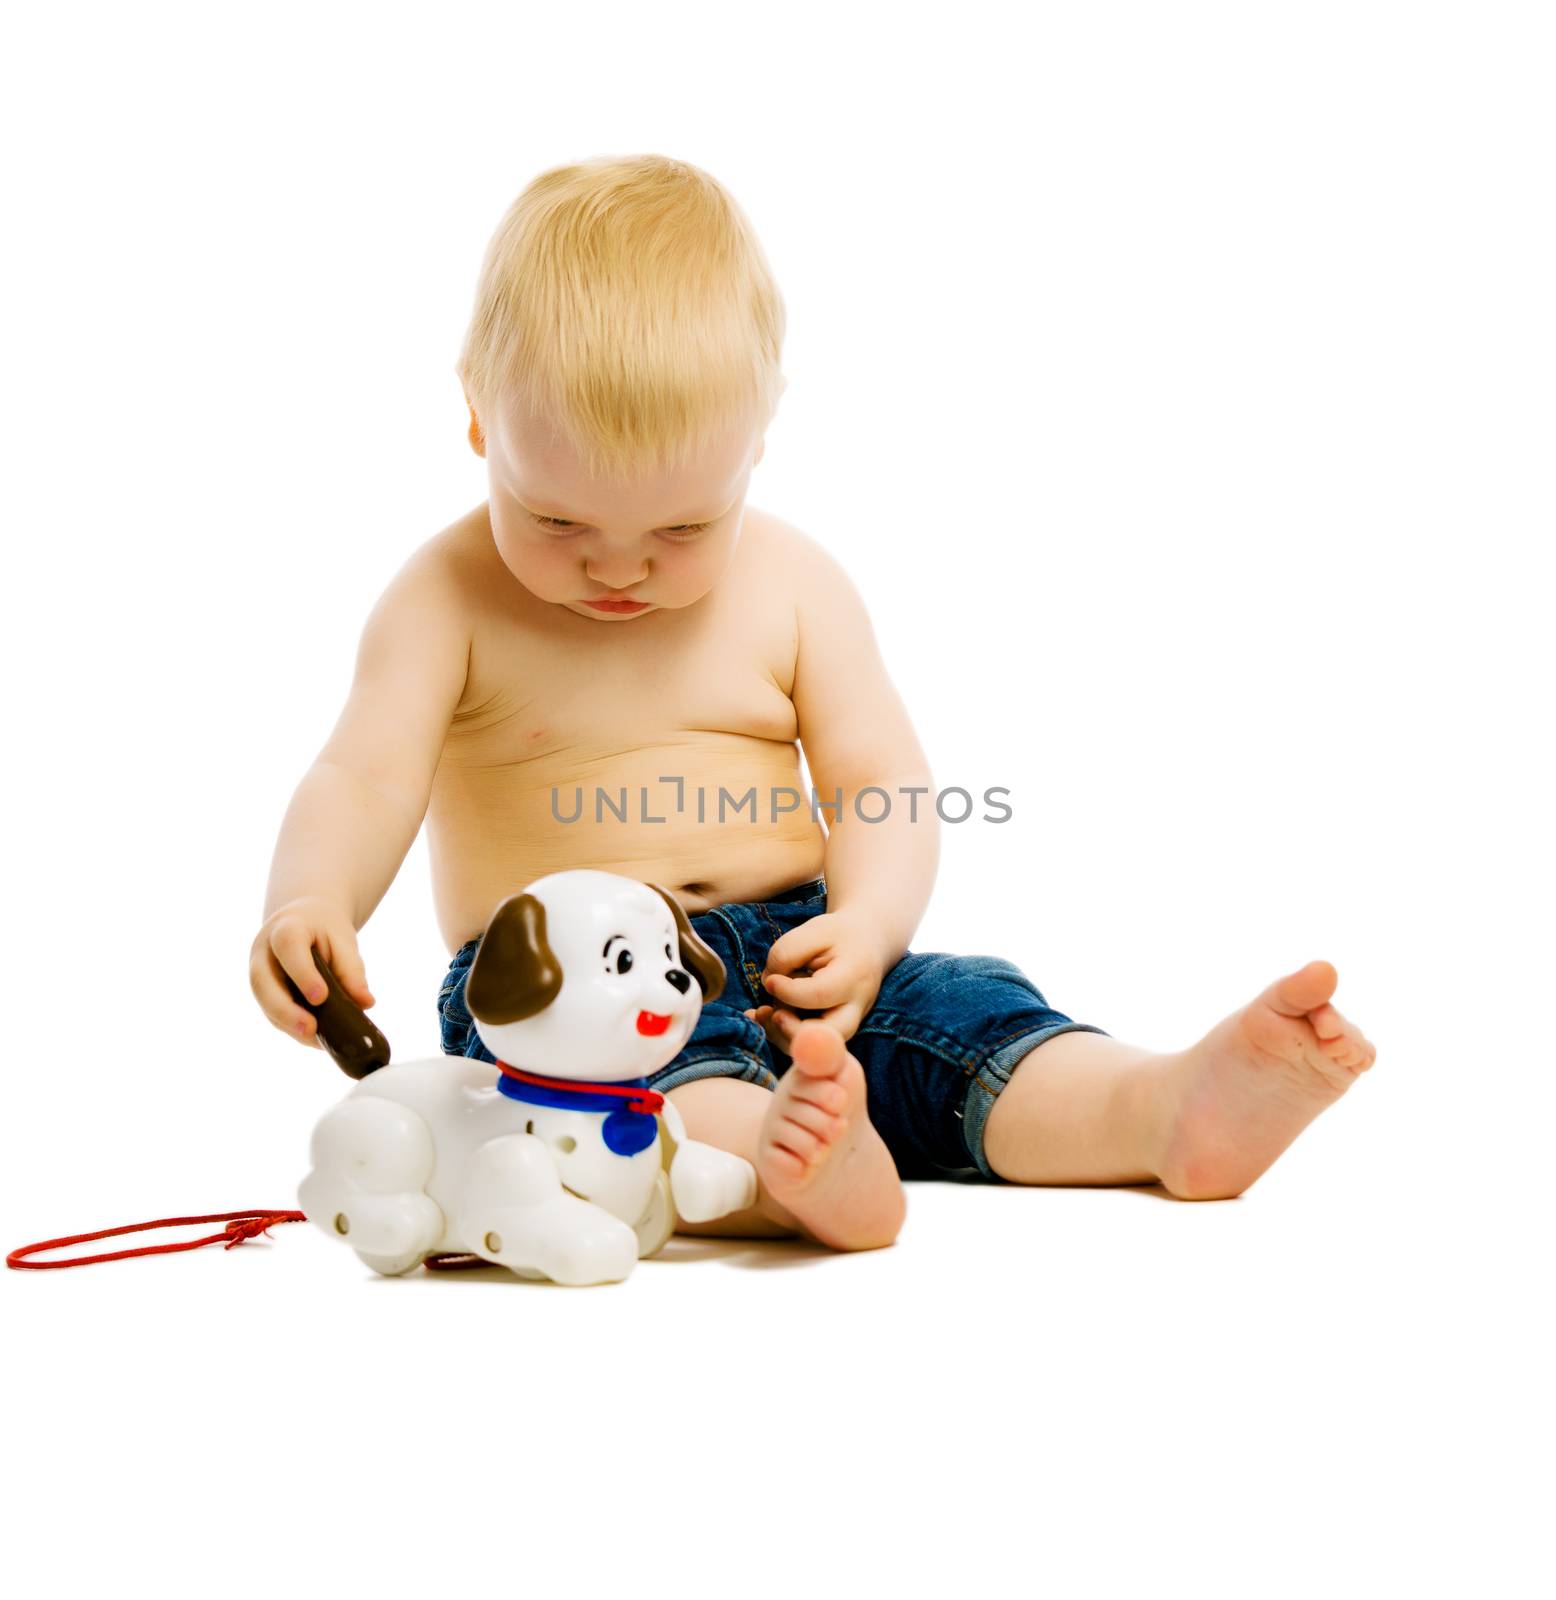 Baby boy playing with toys. Studio. isolated